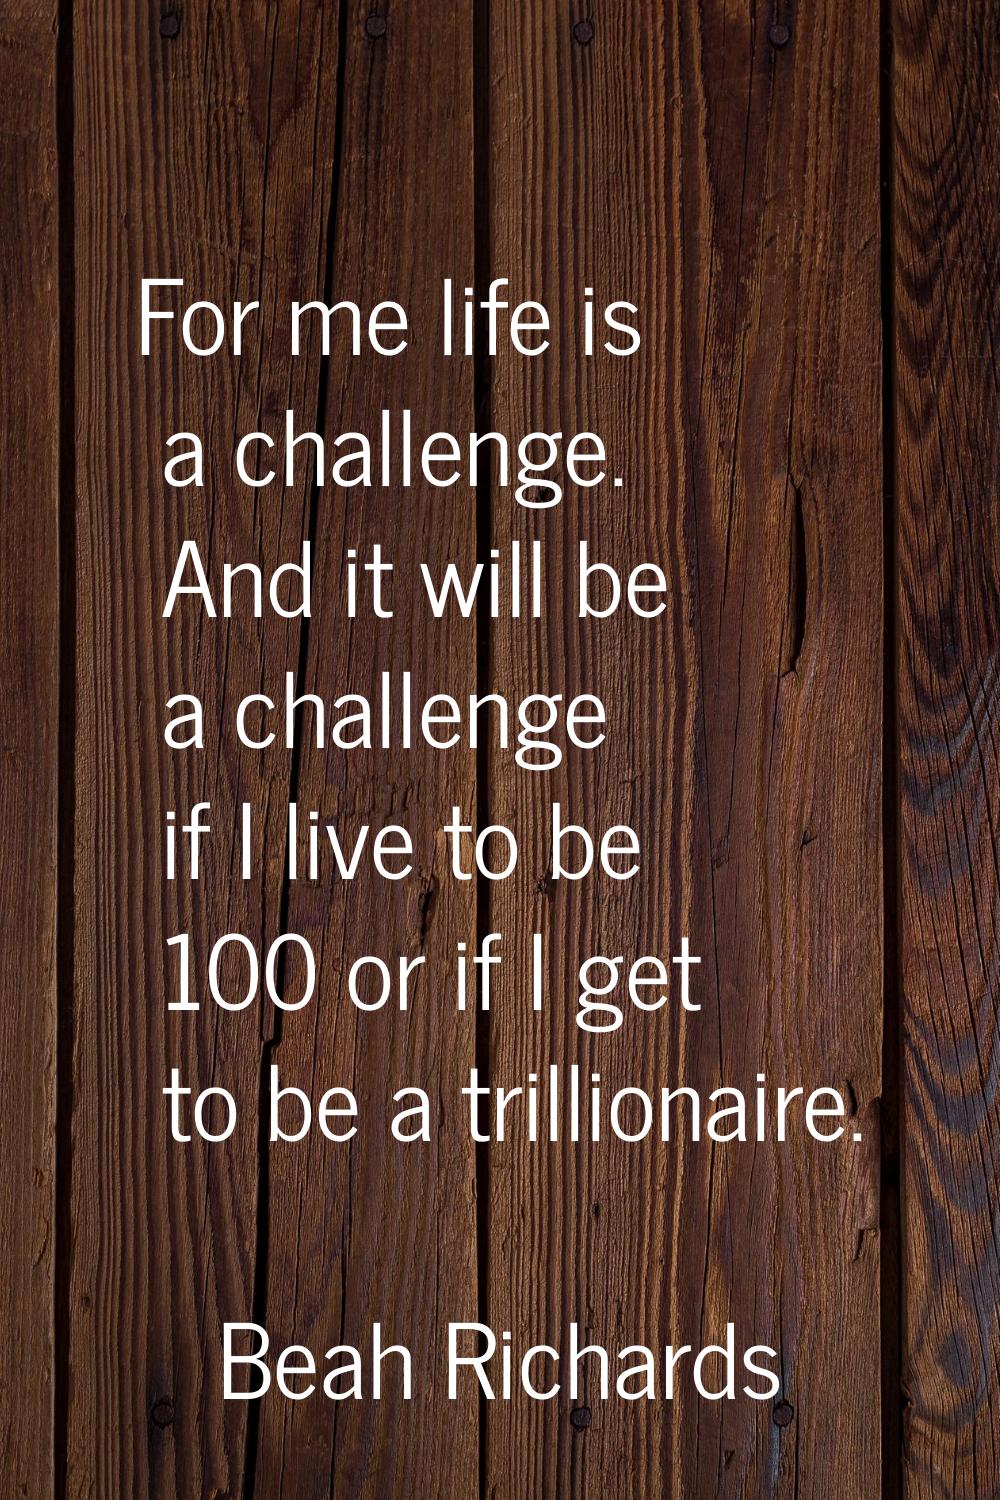 For me life is a challenge. And it will be a challenge if I live to be 100 or if I get to be a tril